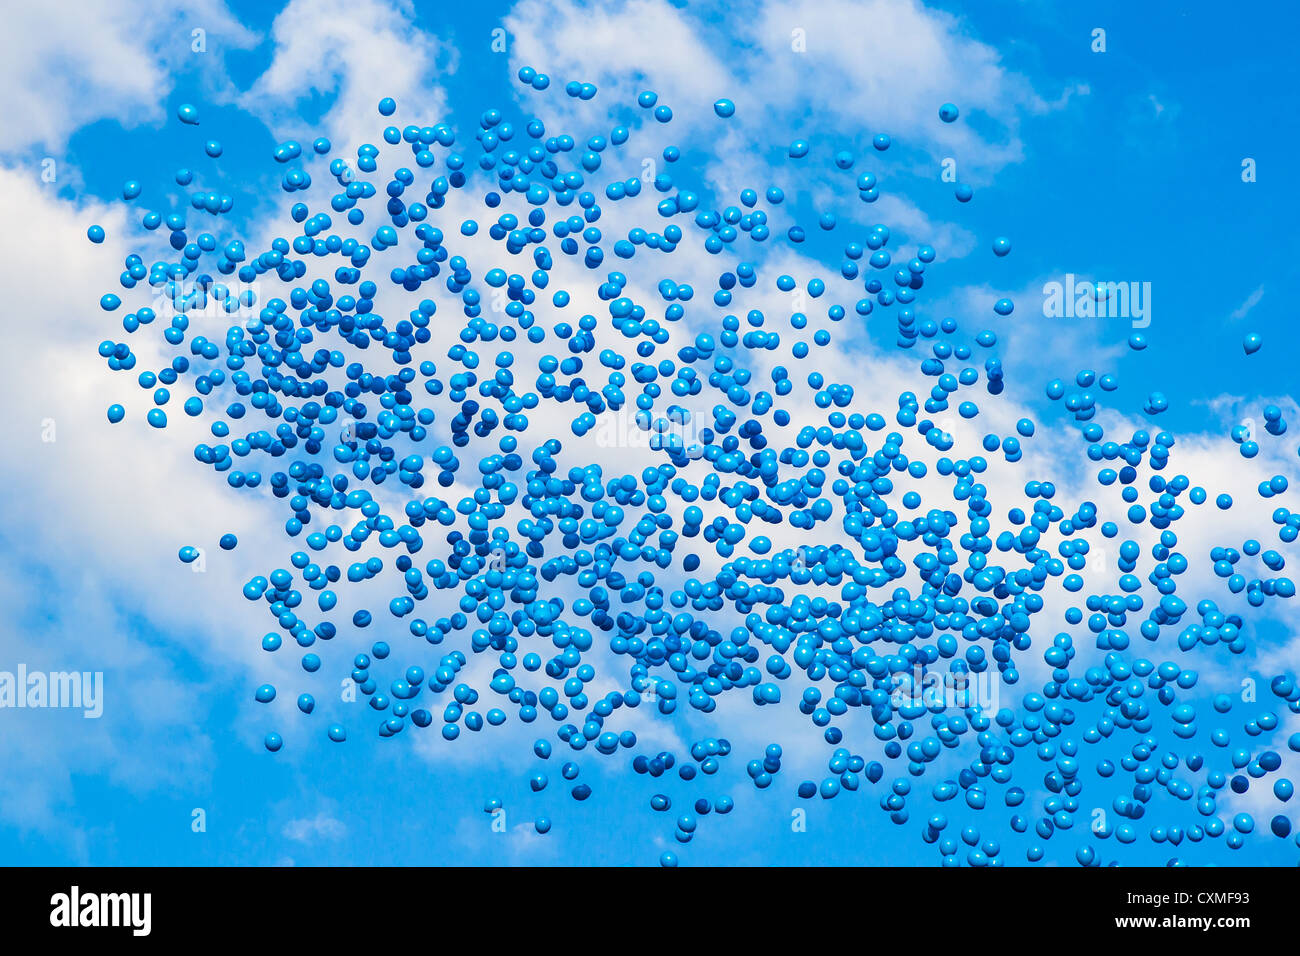 Blue balloons high in the blue sky against white clouds Stock Photo